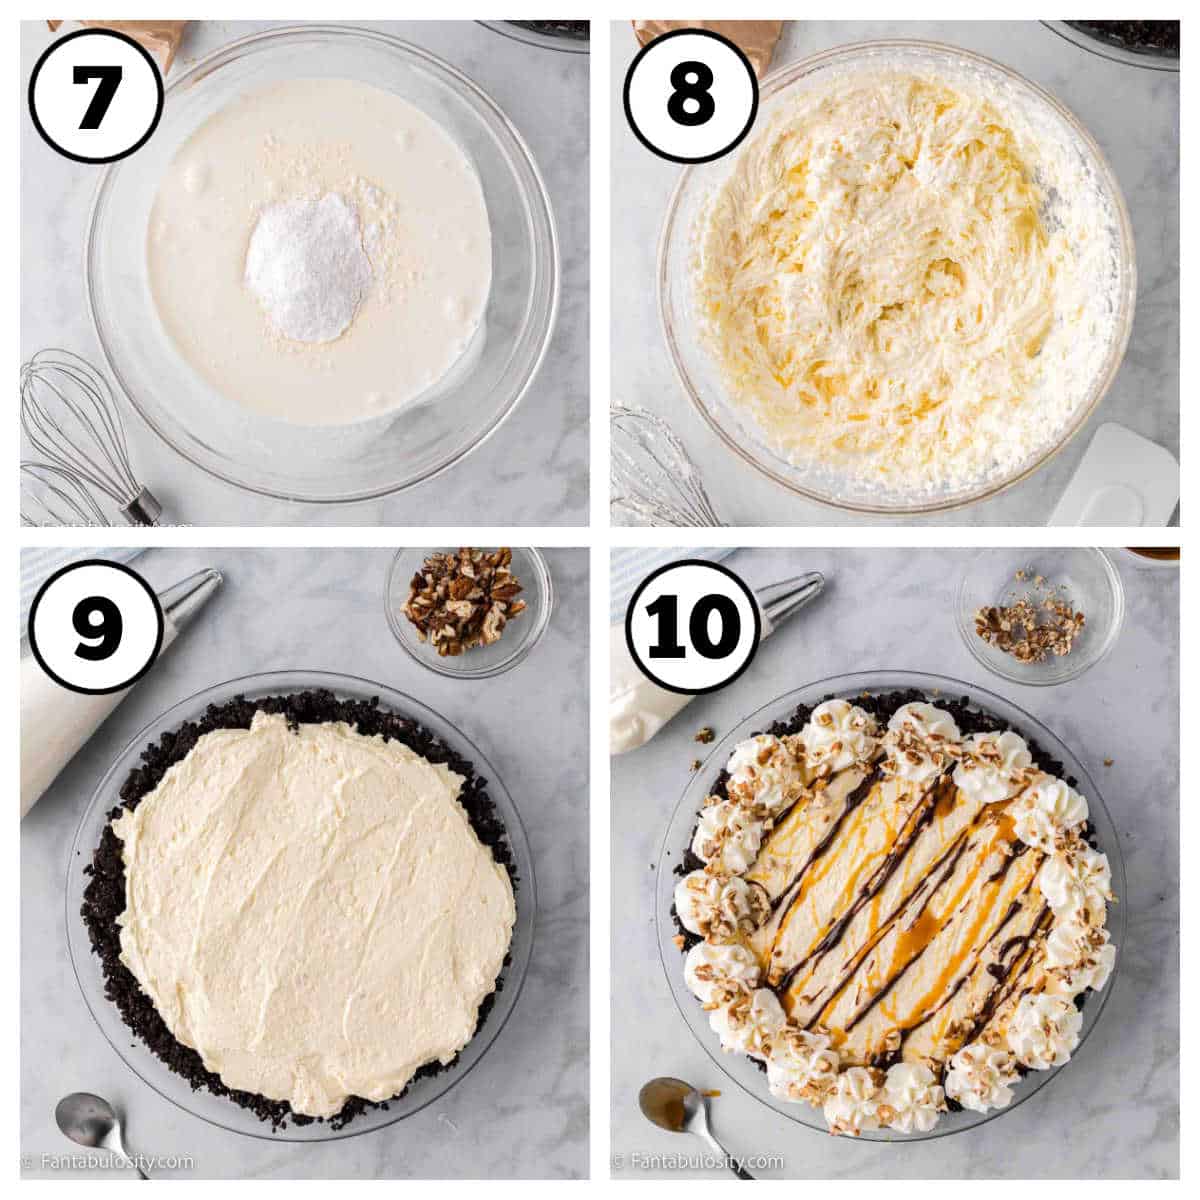 Steps 7-10 for turtle pie recipe.